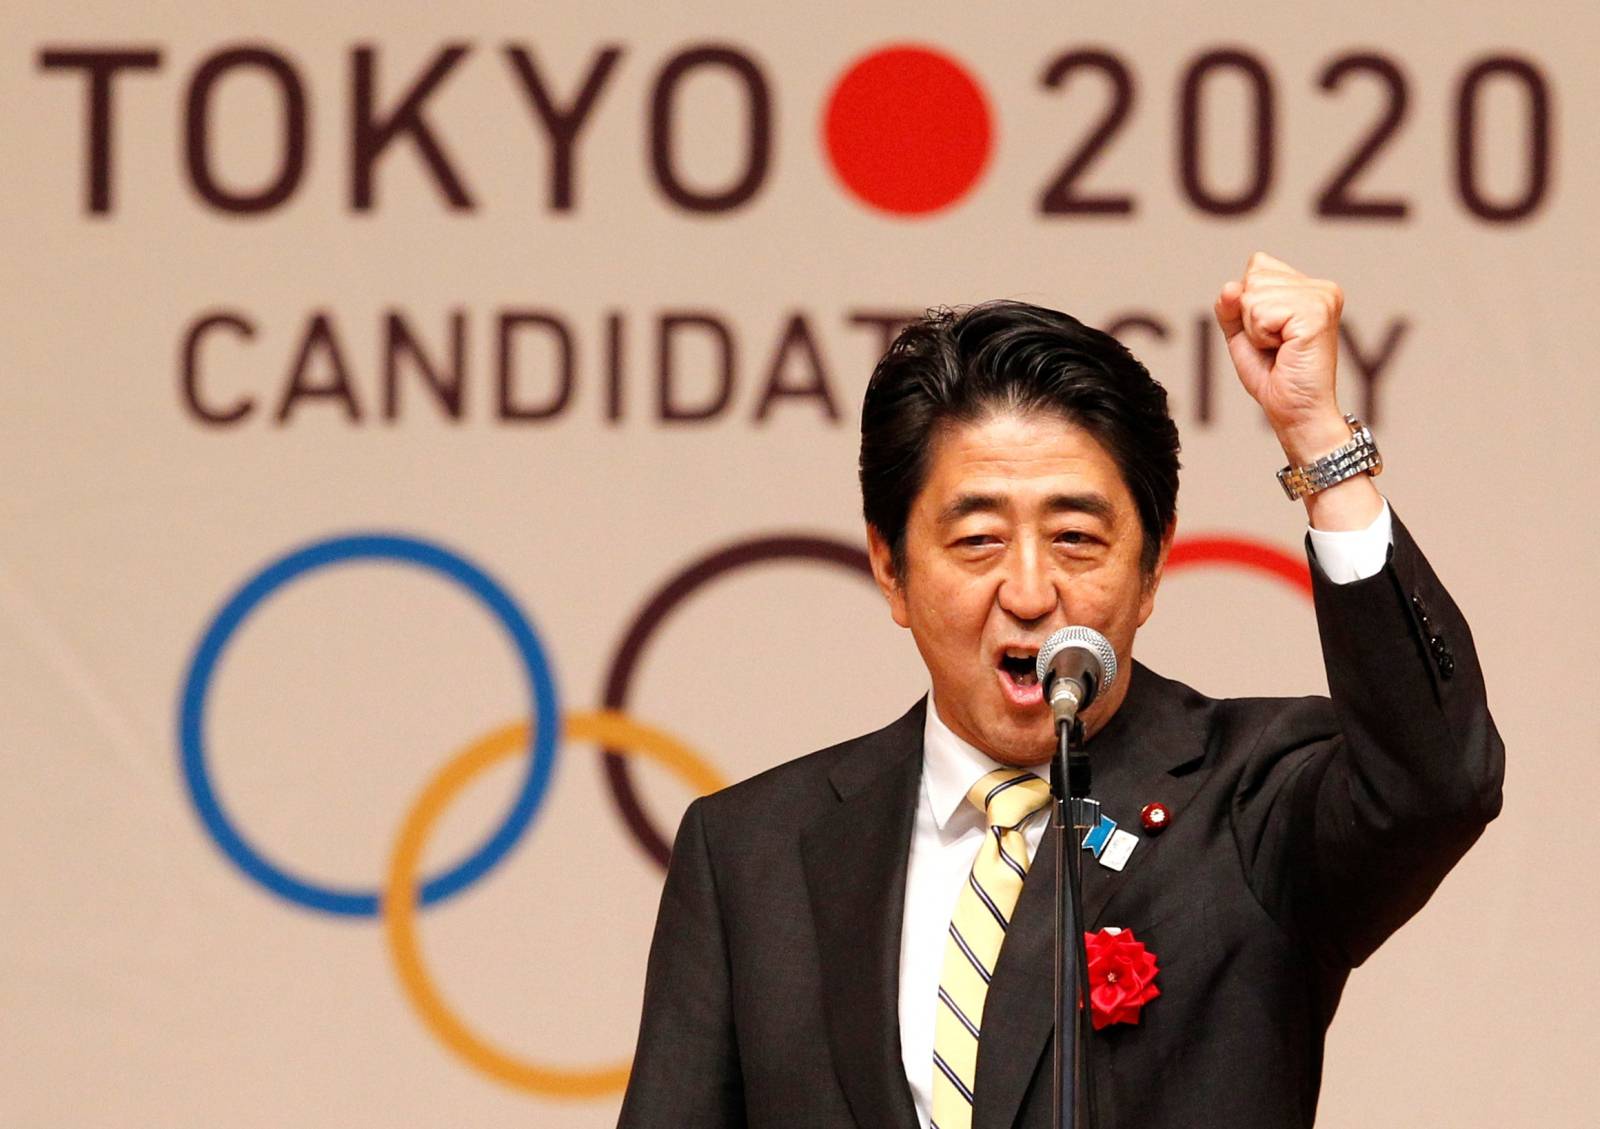 FILE PHOTO: Japan's Prime Minister Shinzo Abe gestures as he speaks during Tokyo 2020 kick off rally in Tokyo